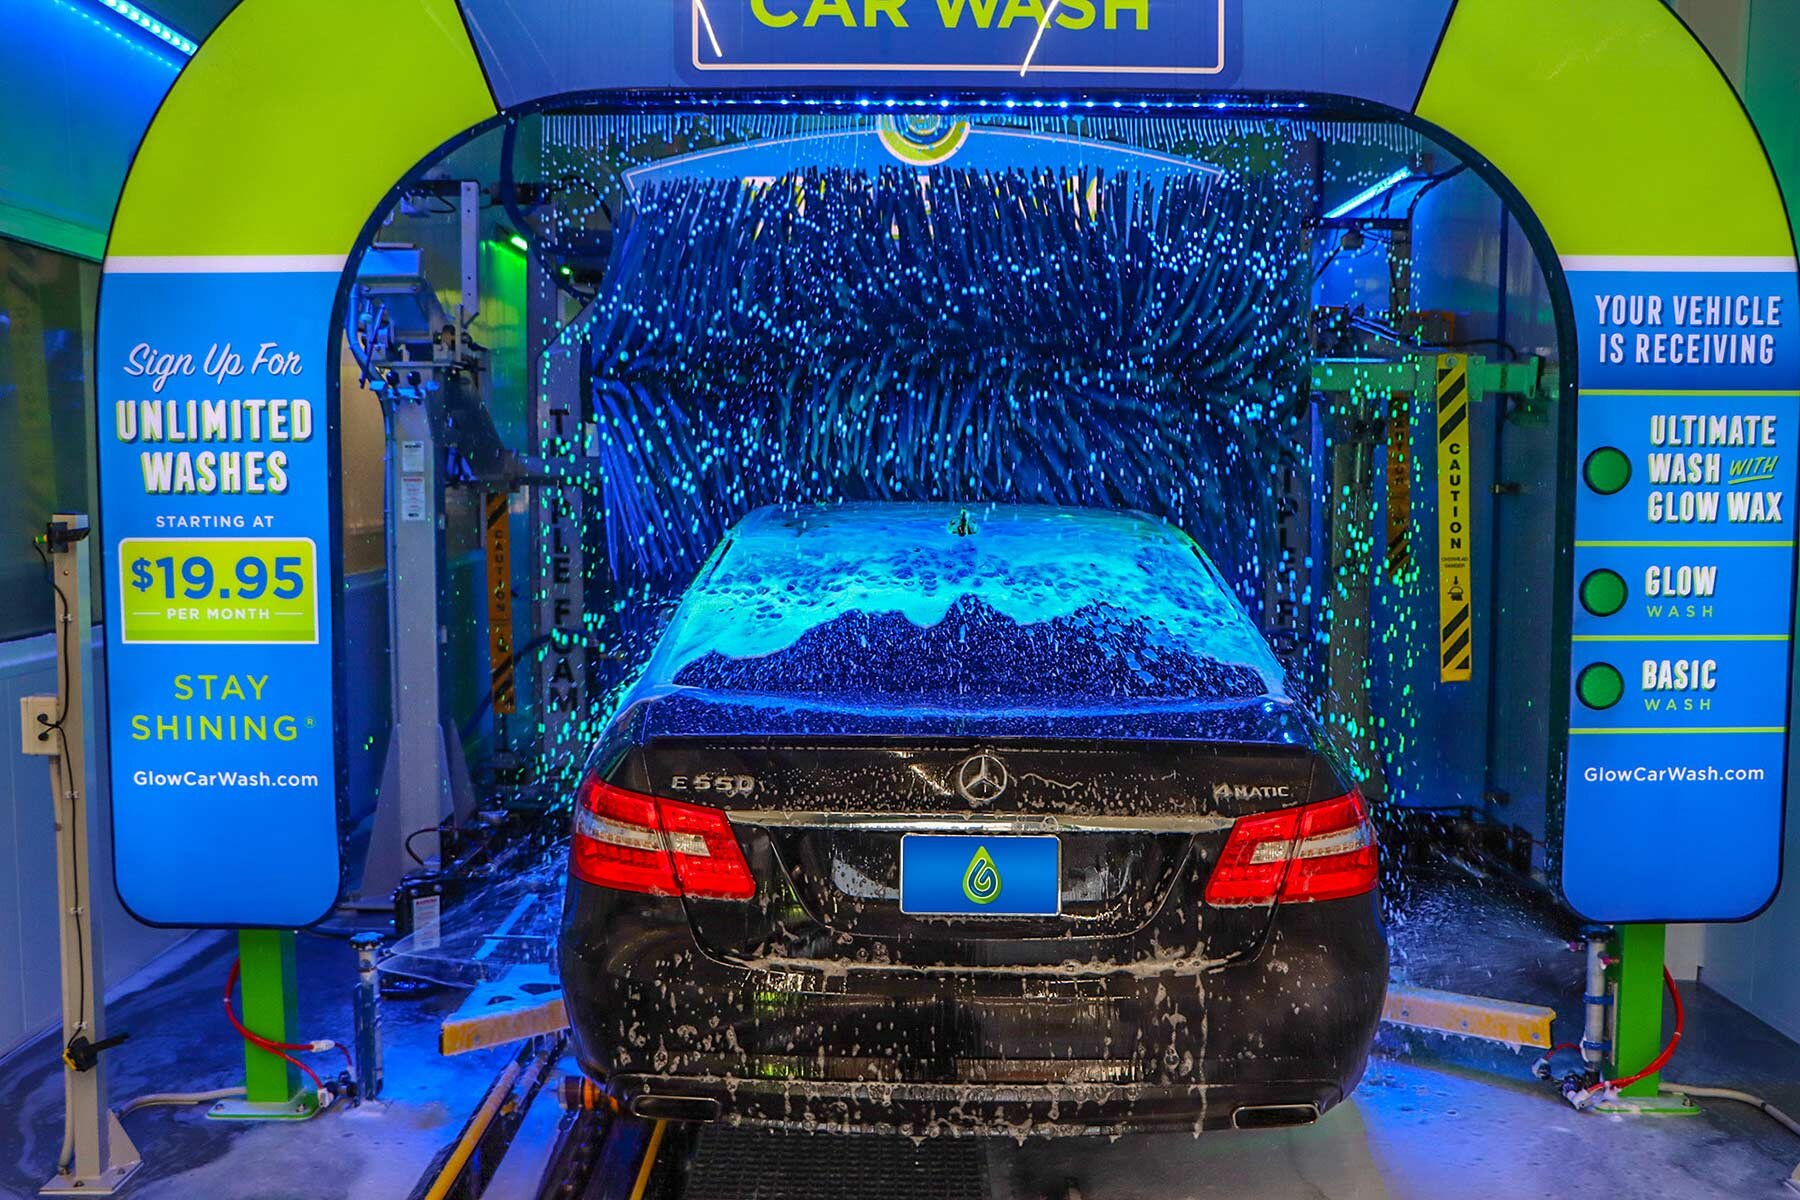 How Do You Wash Your Car At Home